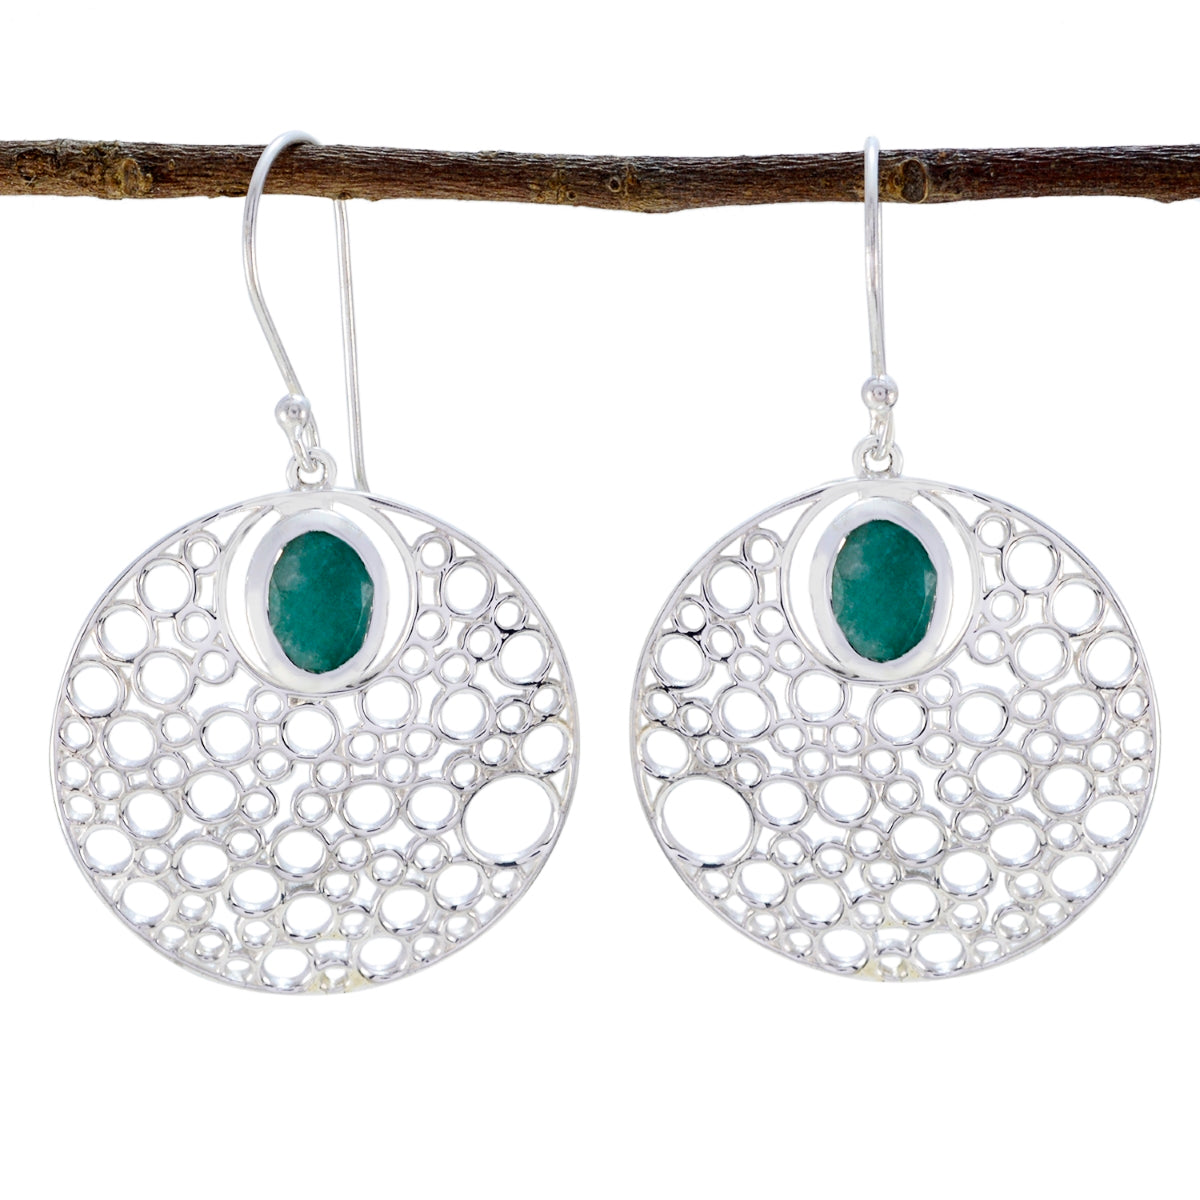 Riyo Real Gemstones round Faceted Green Indian Emerald Silver Earring gift for wife